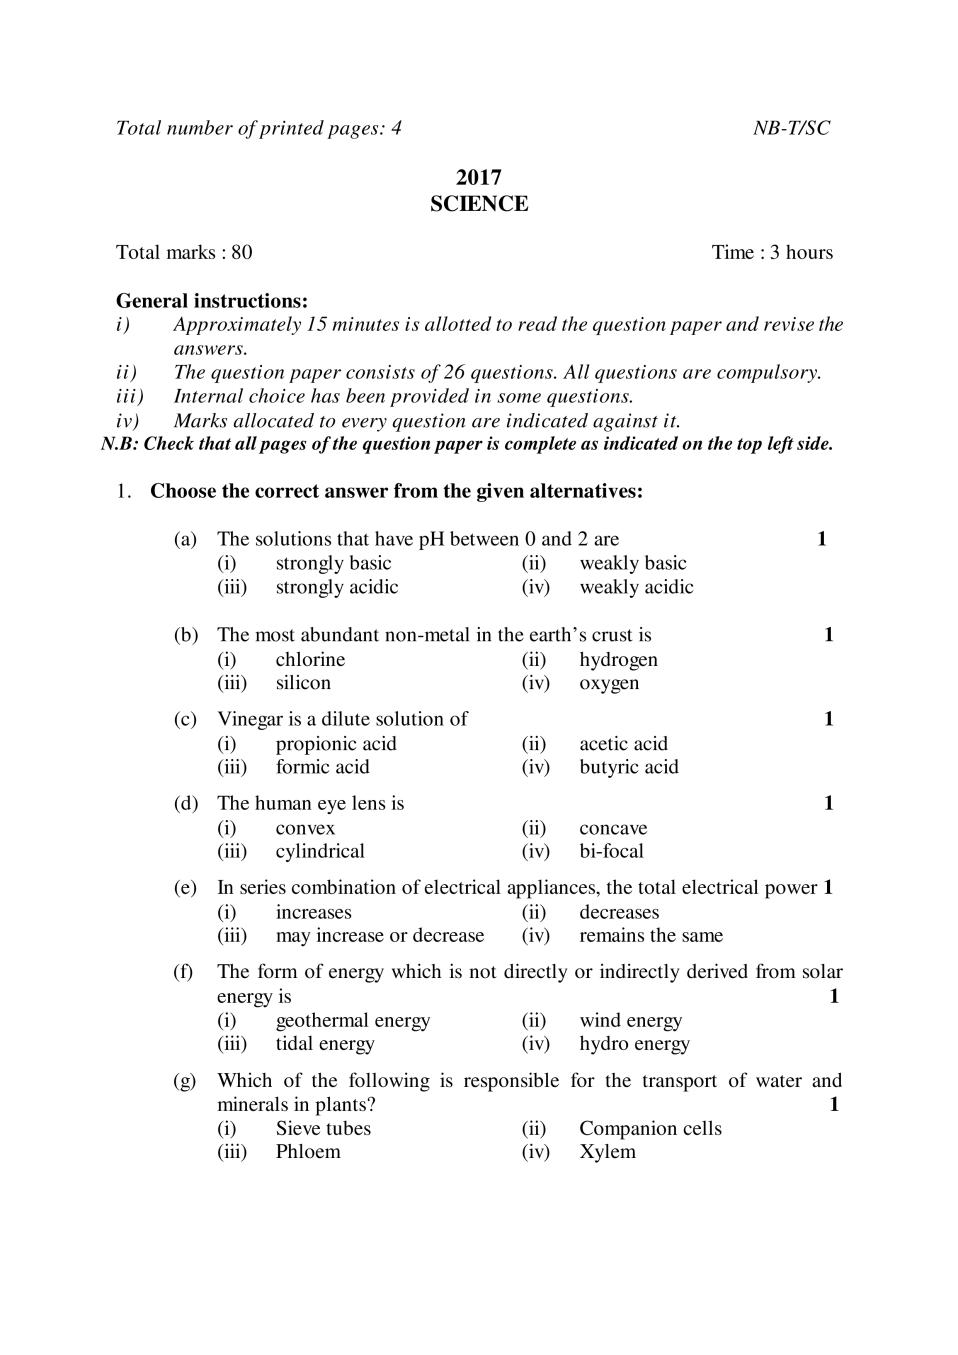 NBSE Class 10 Question Paper 2017 for Science - Page 1